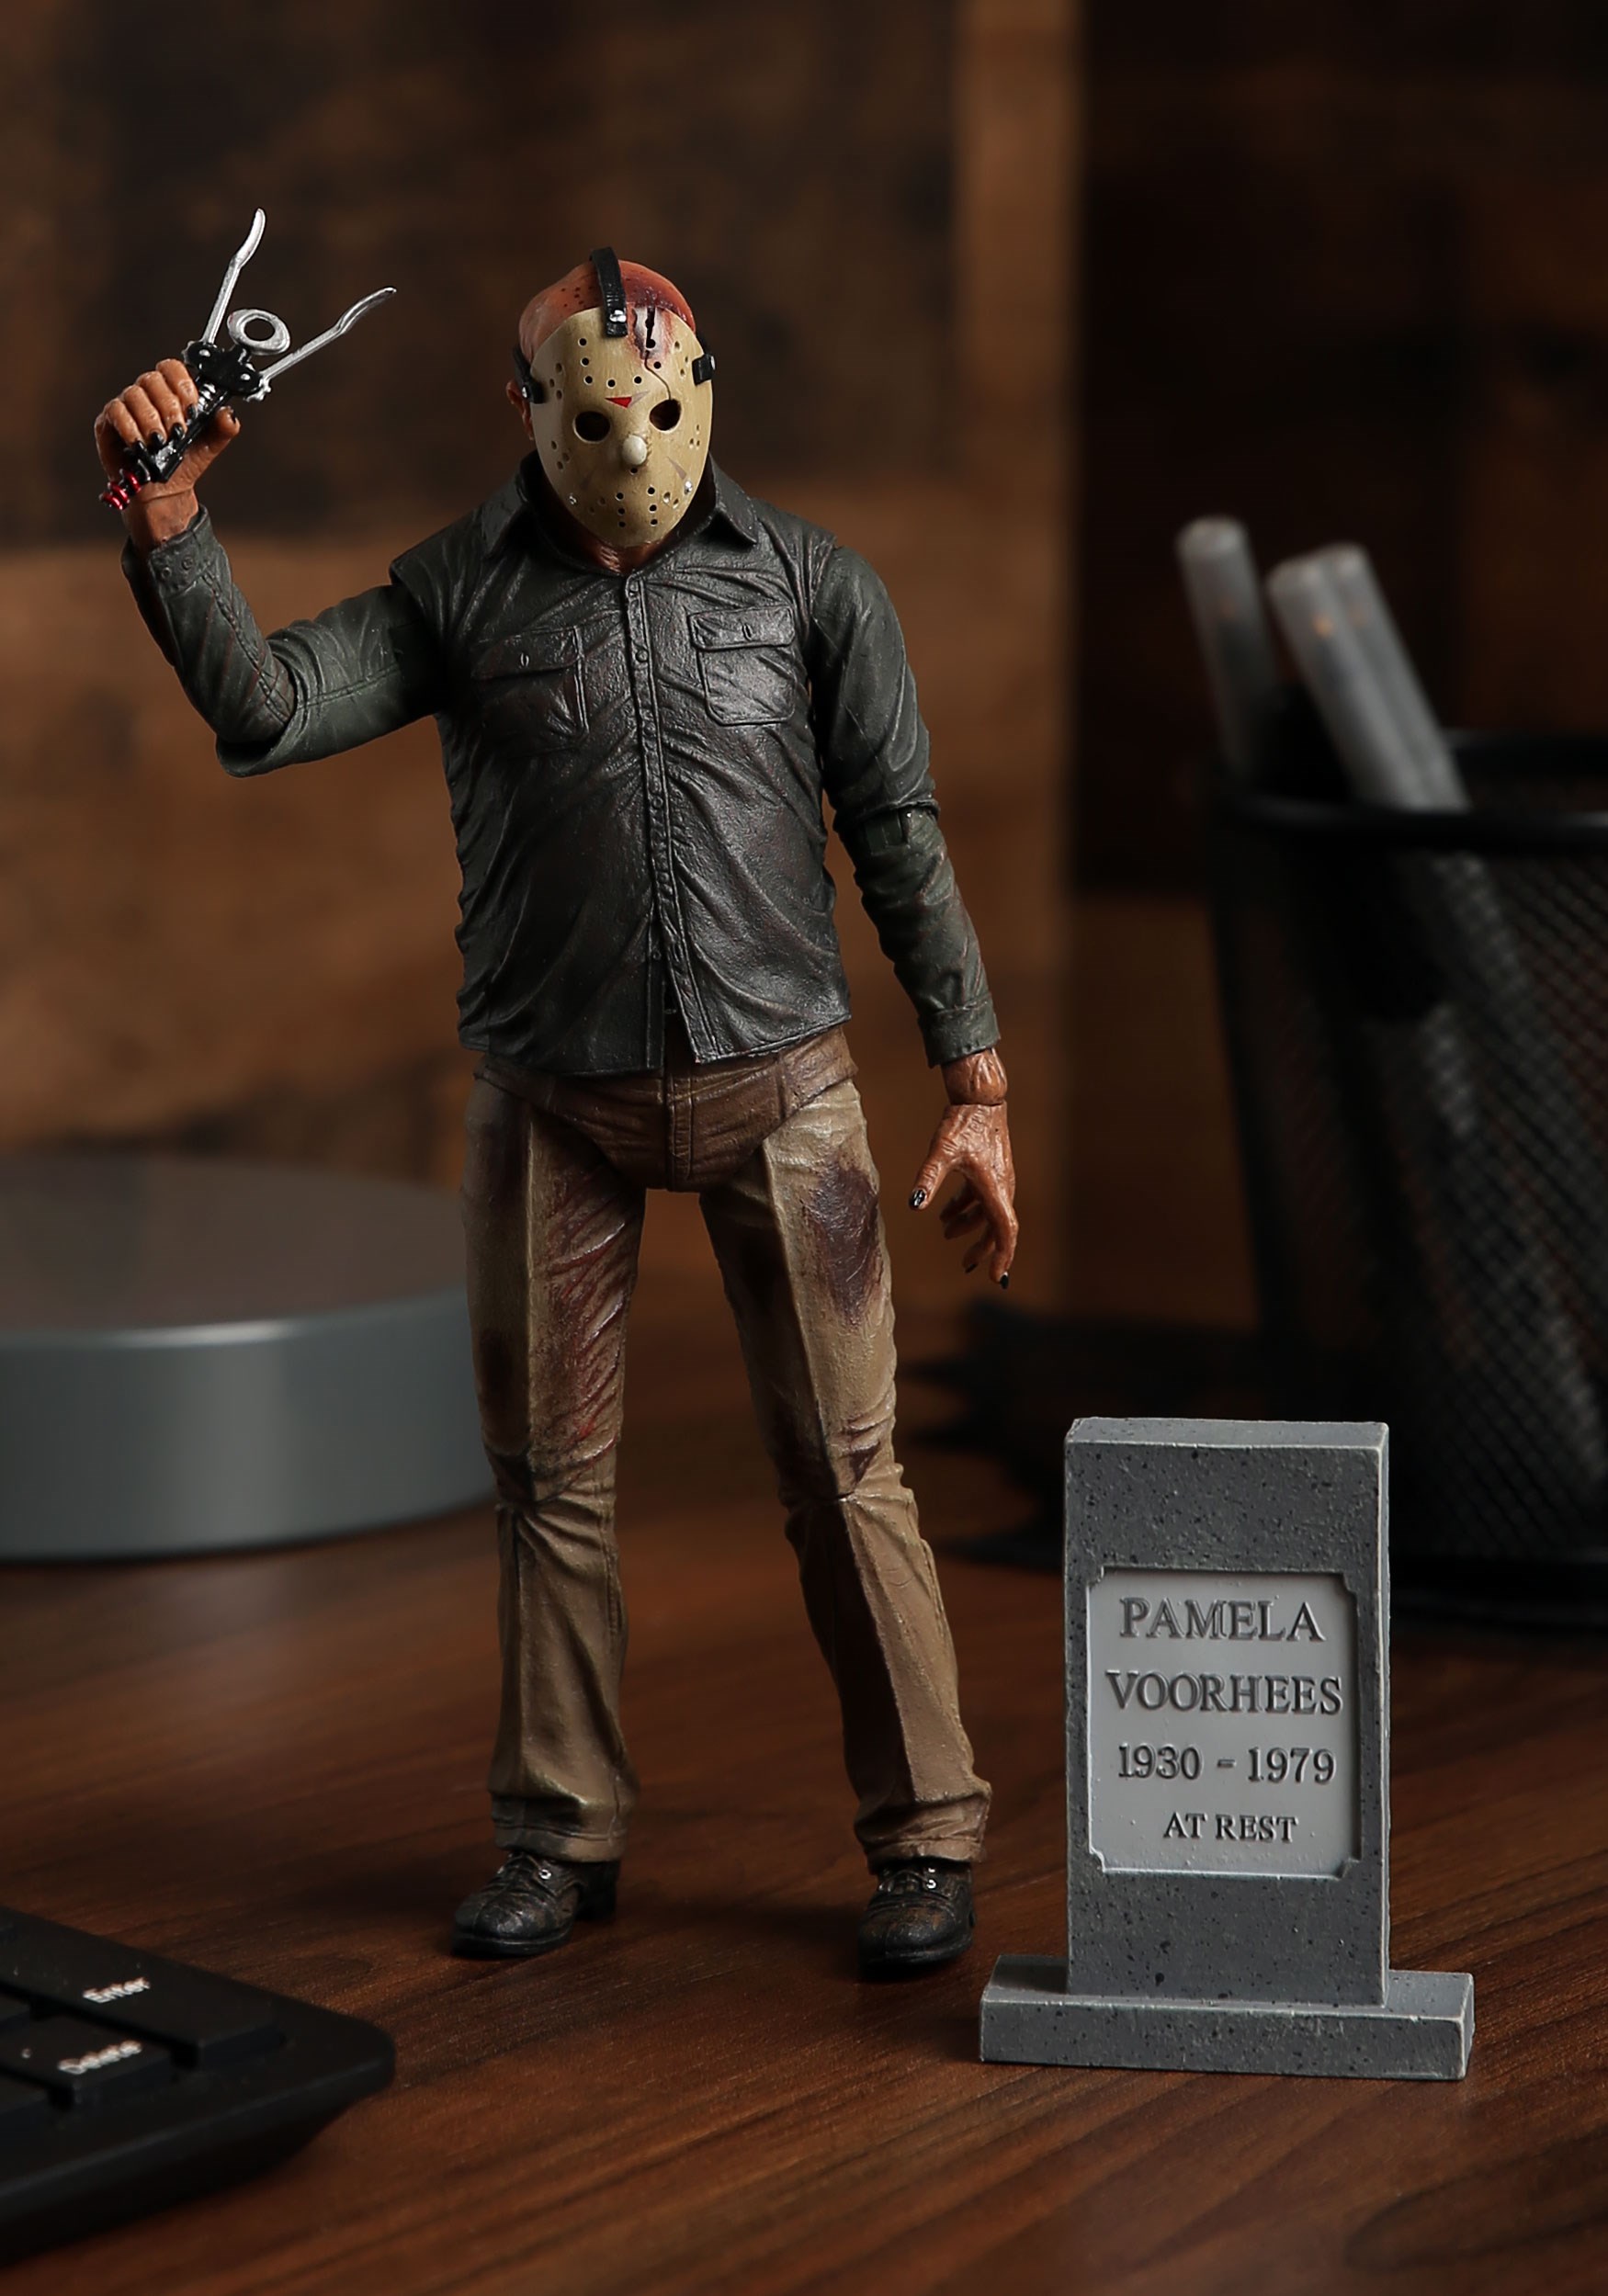 friday the 13th part 4 figure